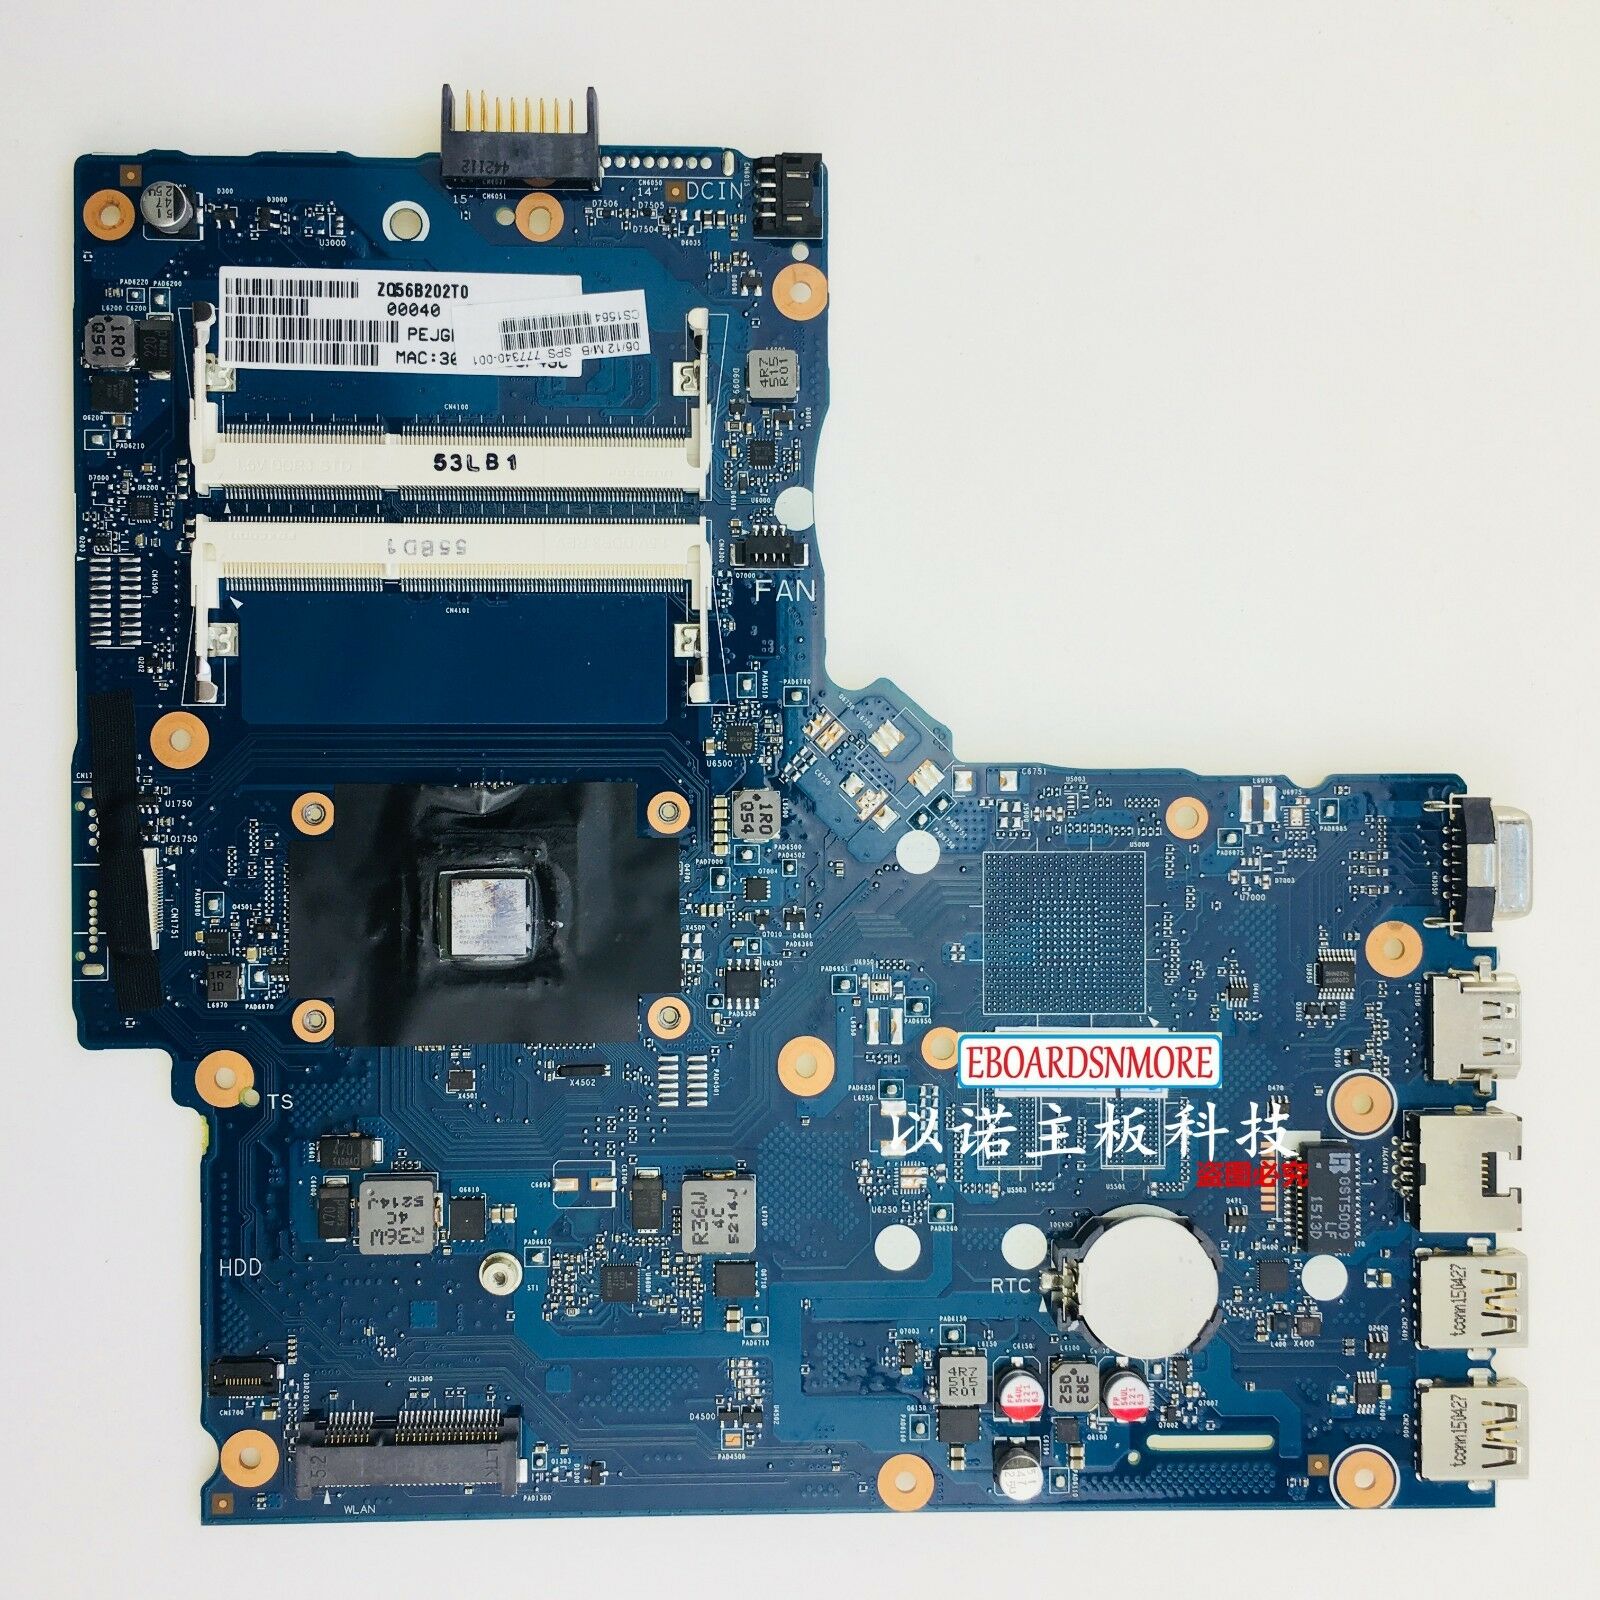 HP 355 G2 Laptop Motherboard,777340-001 ICEA10-6050A2612501 W/ A8-6410 CPU Compatible CPU Brand: AMD Memor